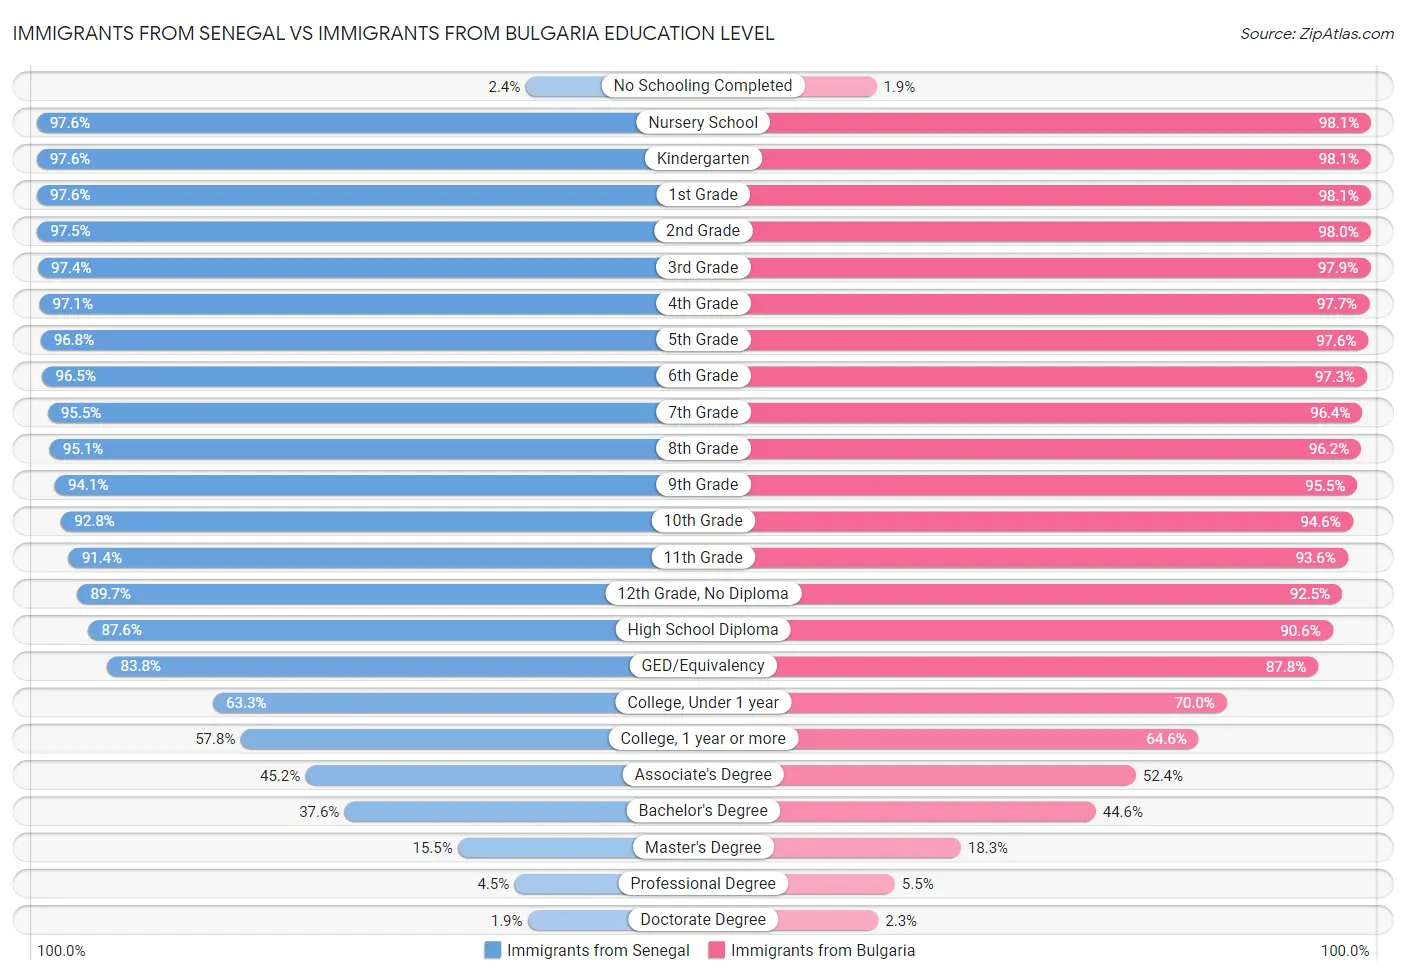 Immigrants from Senegal vs Immigrants from Bulgaria Education Level